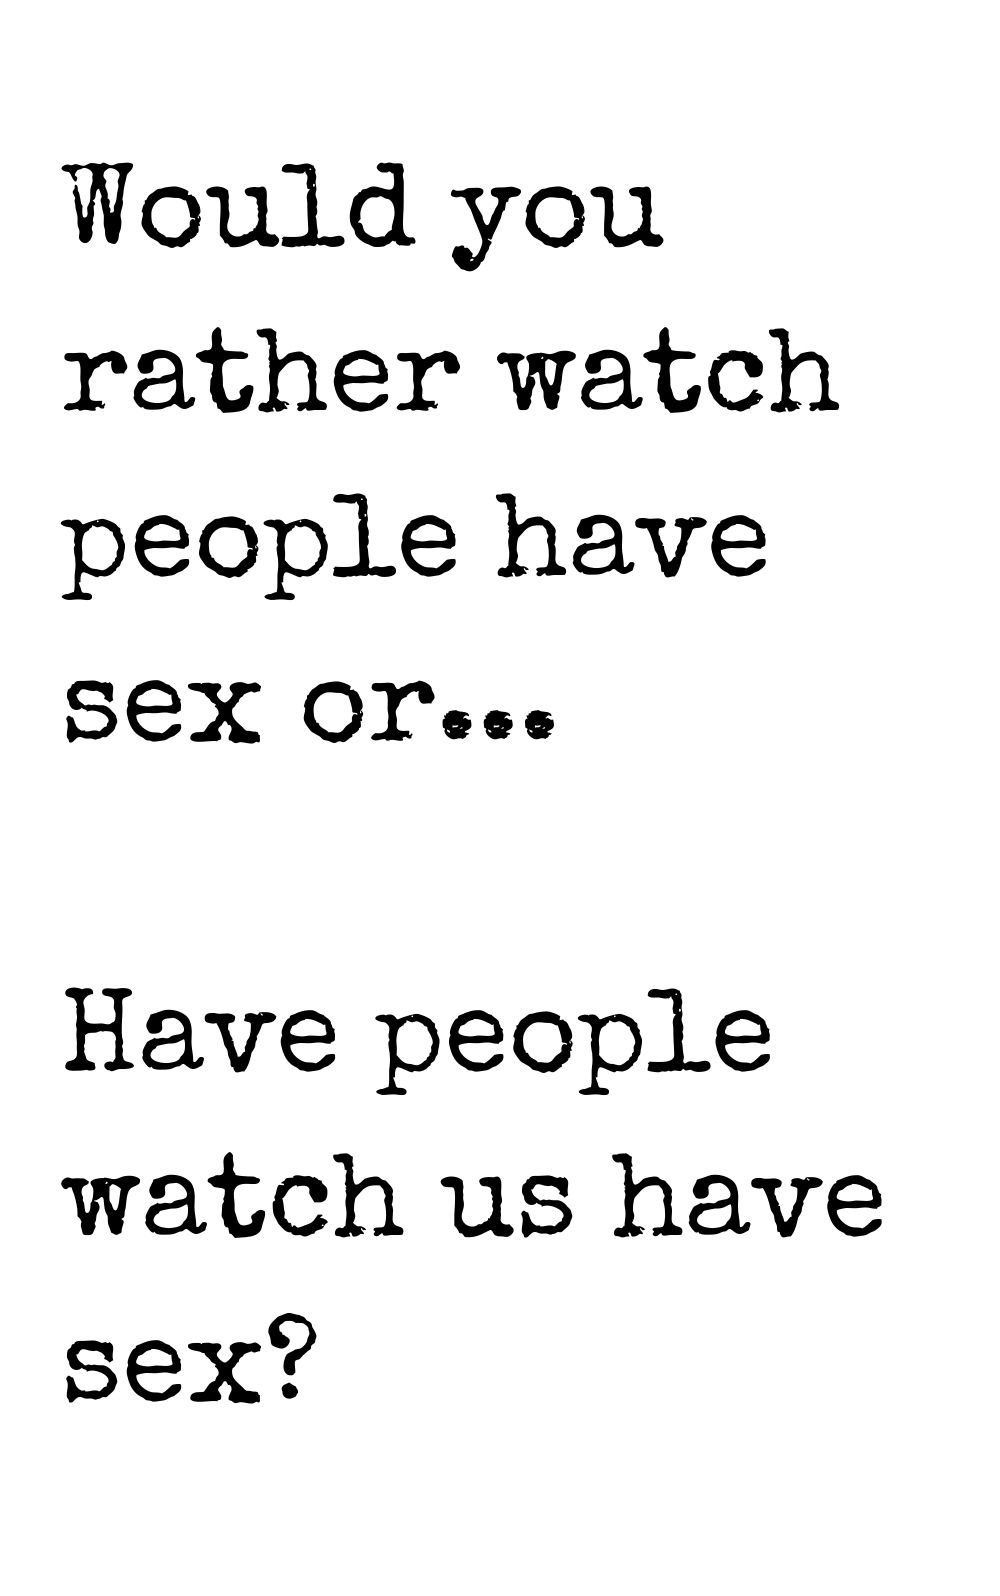 would you rather watch people have sex of have people watch us have sex